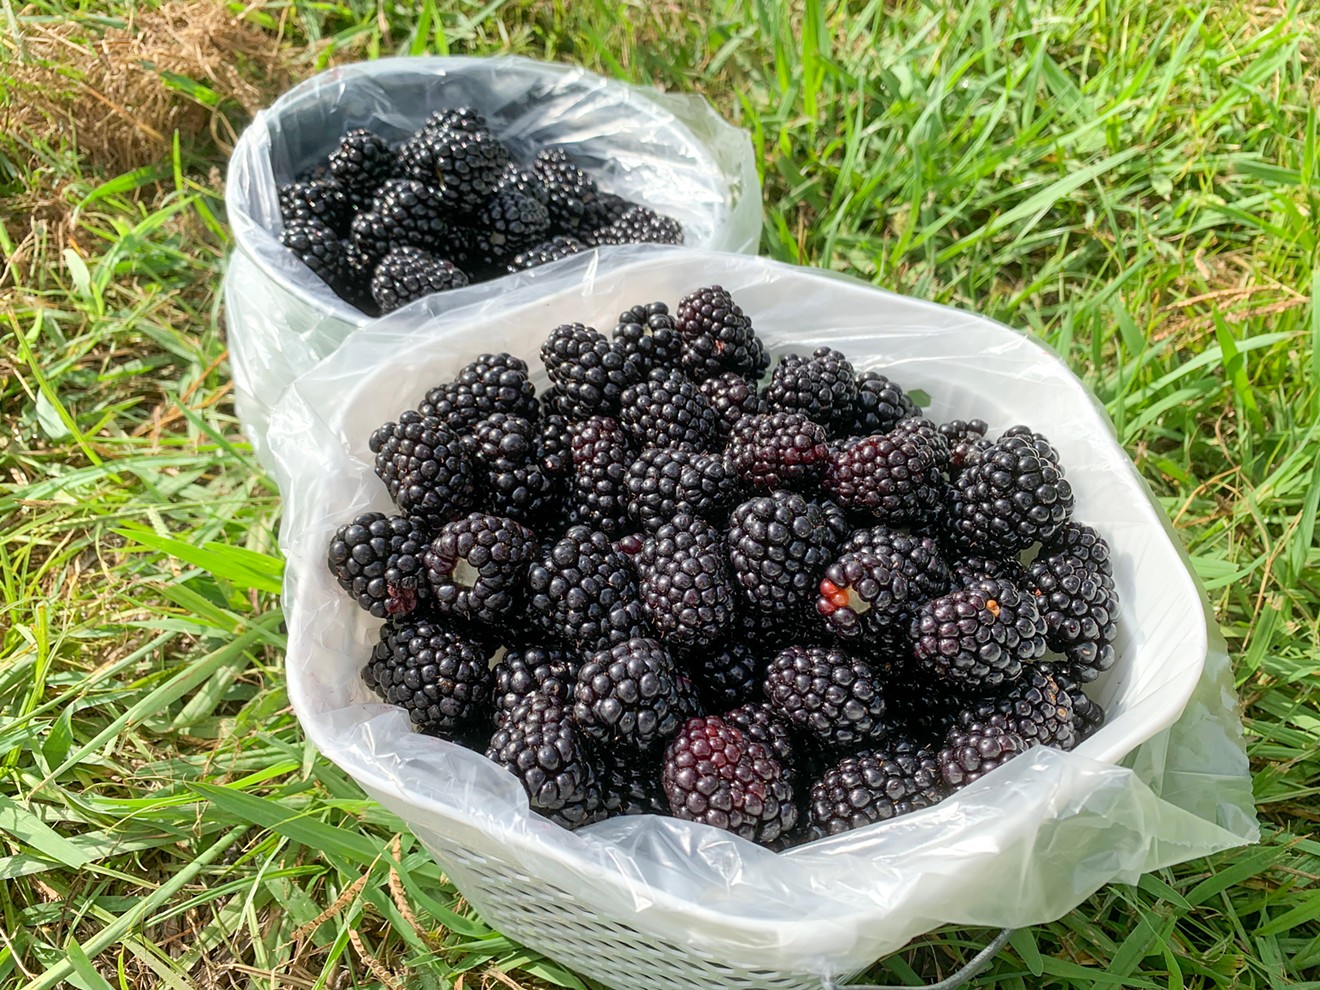 Freshly picked blackberries, which are soon to be jam.